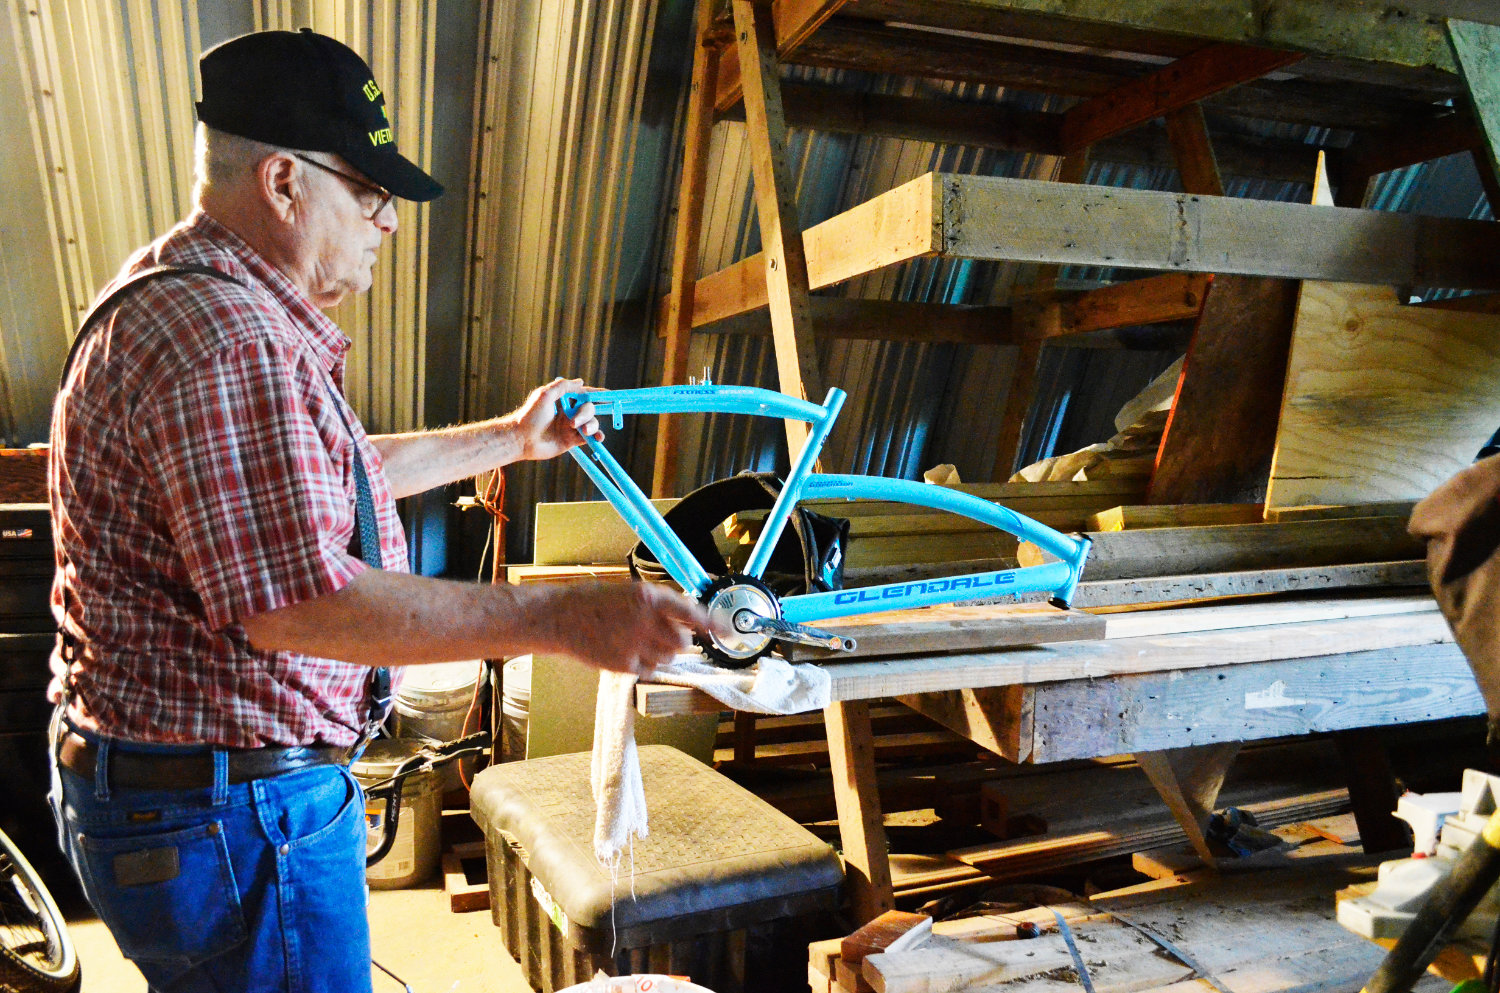 Robert Pierce holds a bike part that he is using to repair other bicycles. The Mineola resident rebuilds older or damaged bikes for those in need.